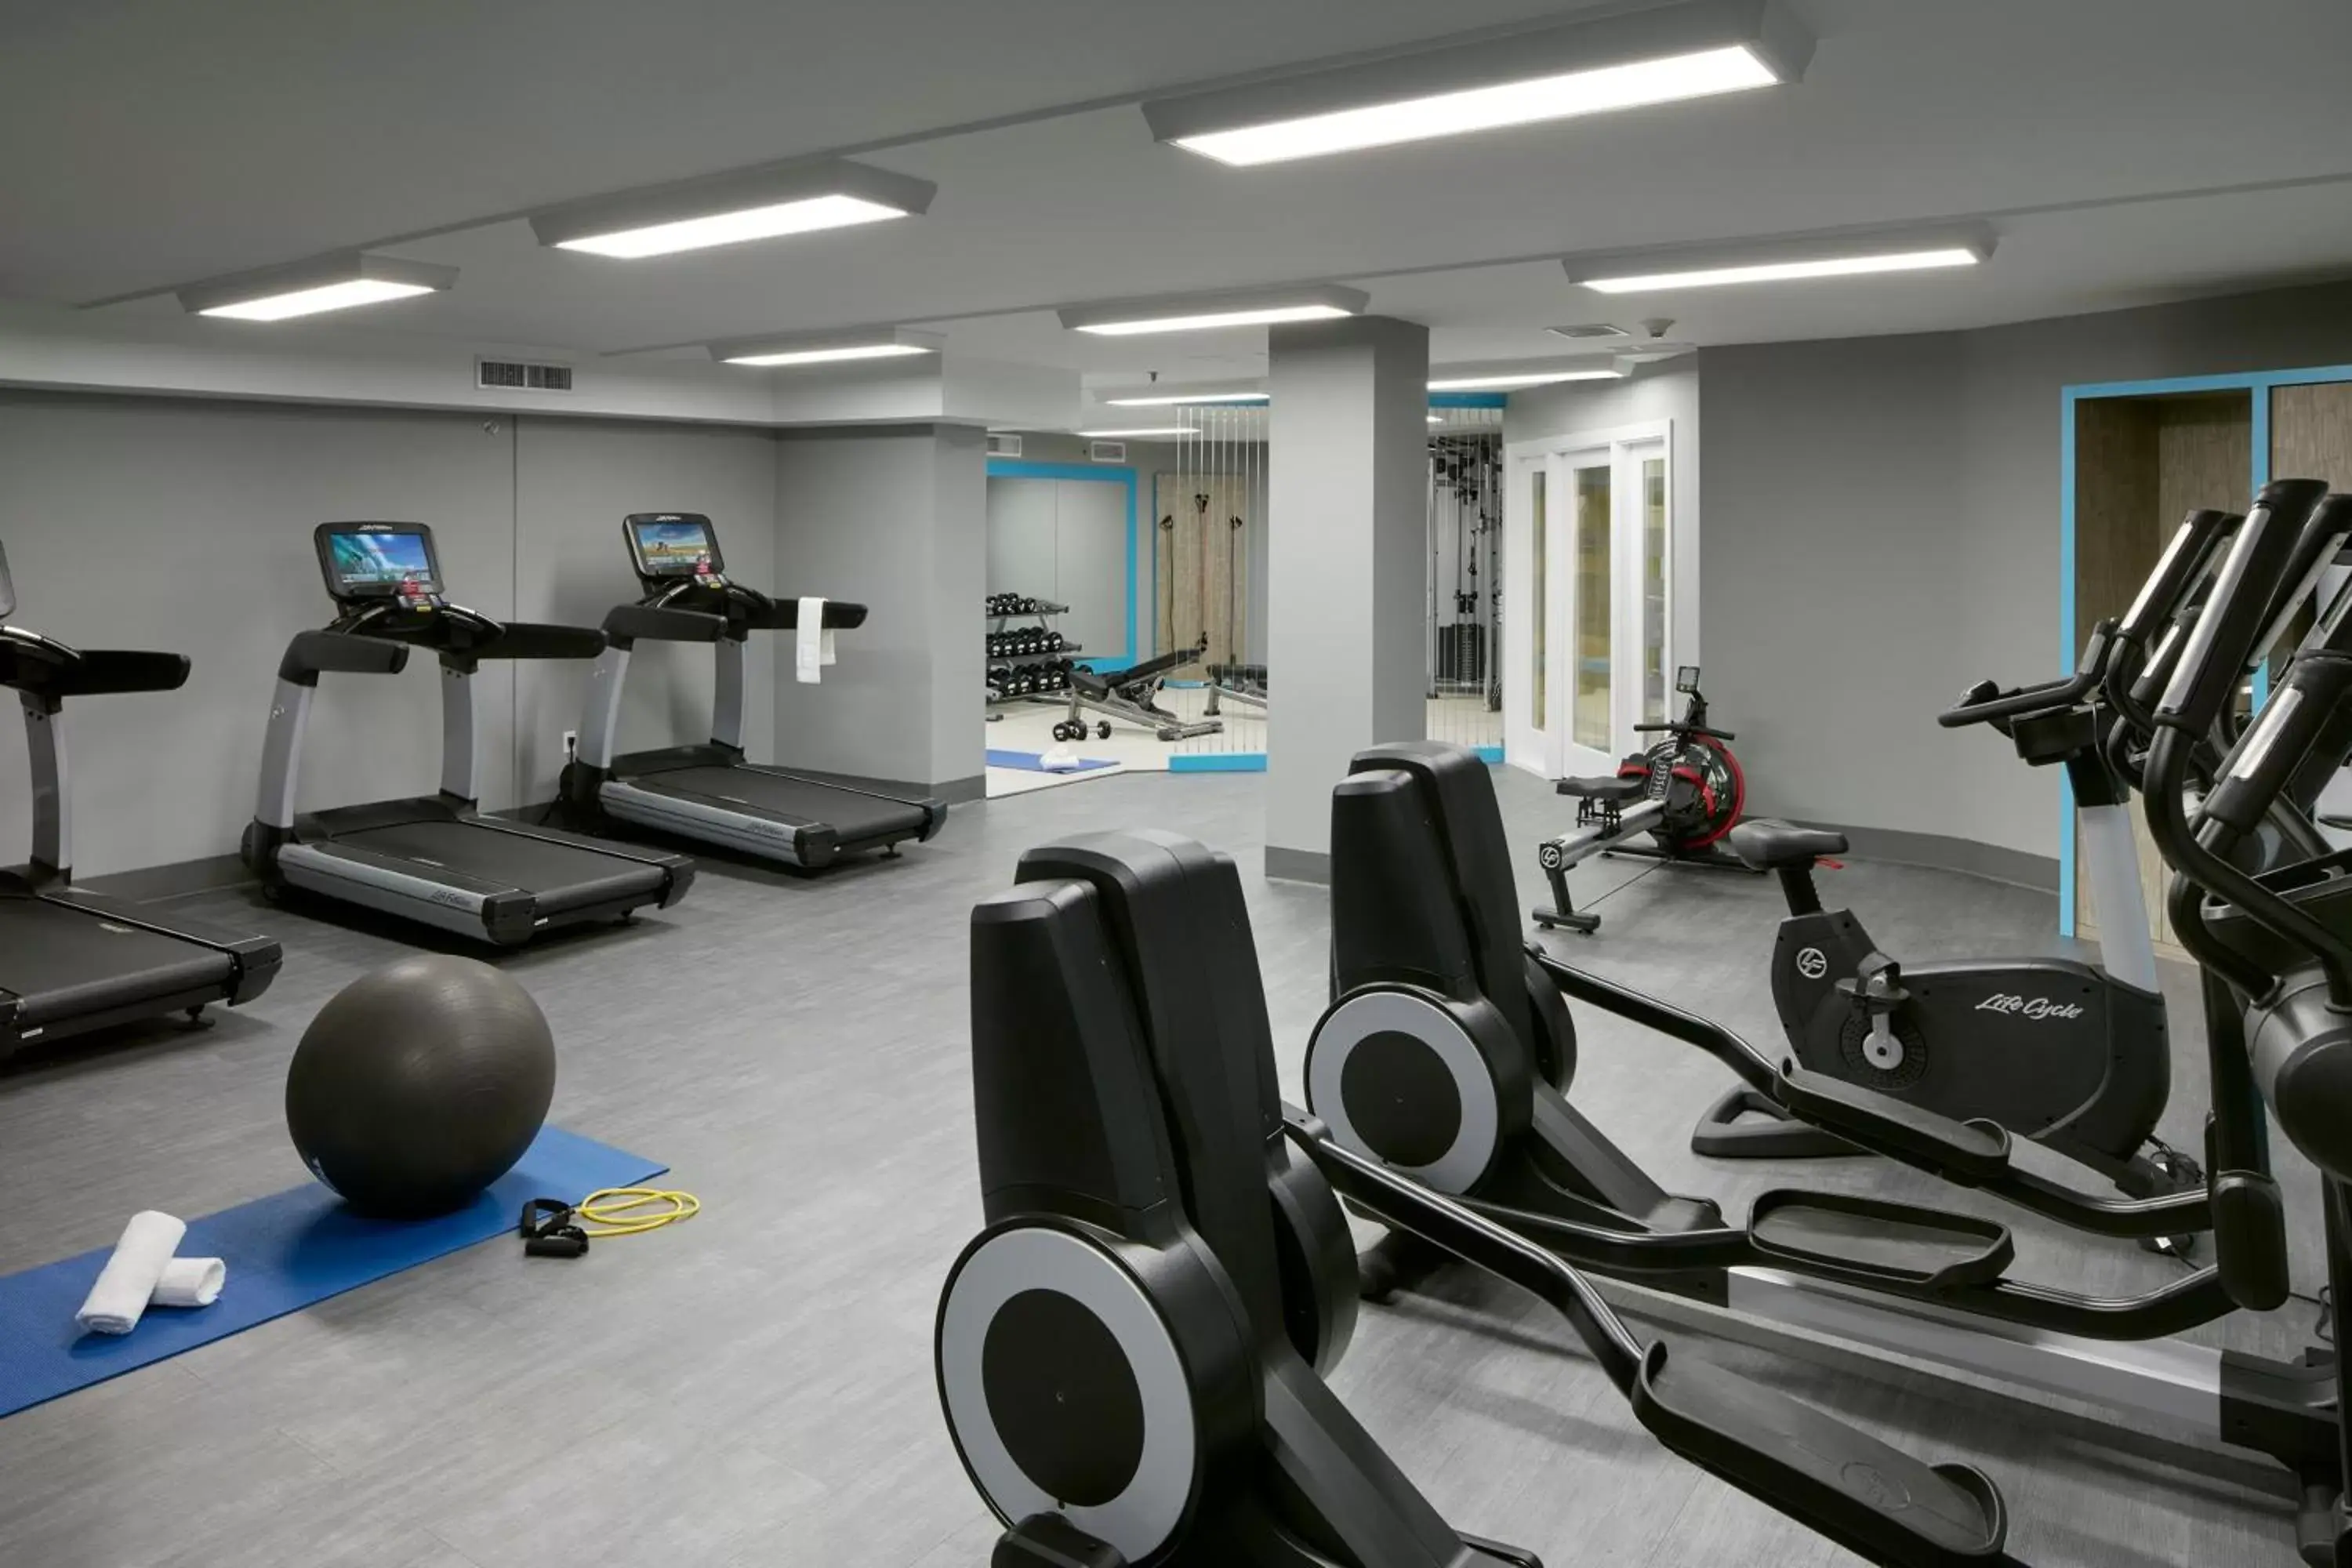 Fitness centre/facilities, Fitness Center/Facilities in Crowne Plaza Cabana Hotel, an IHG Hotel